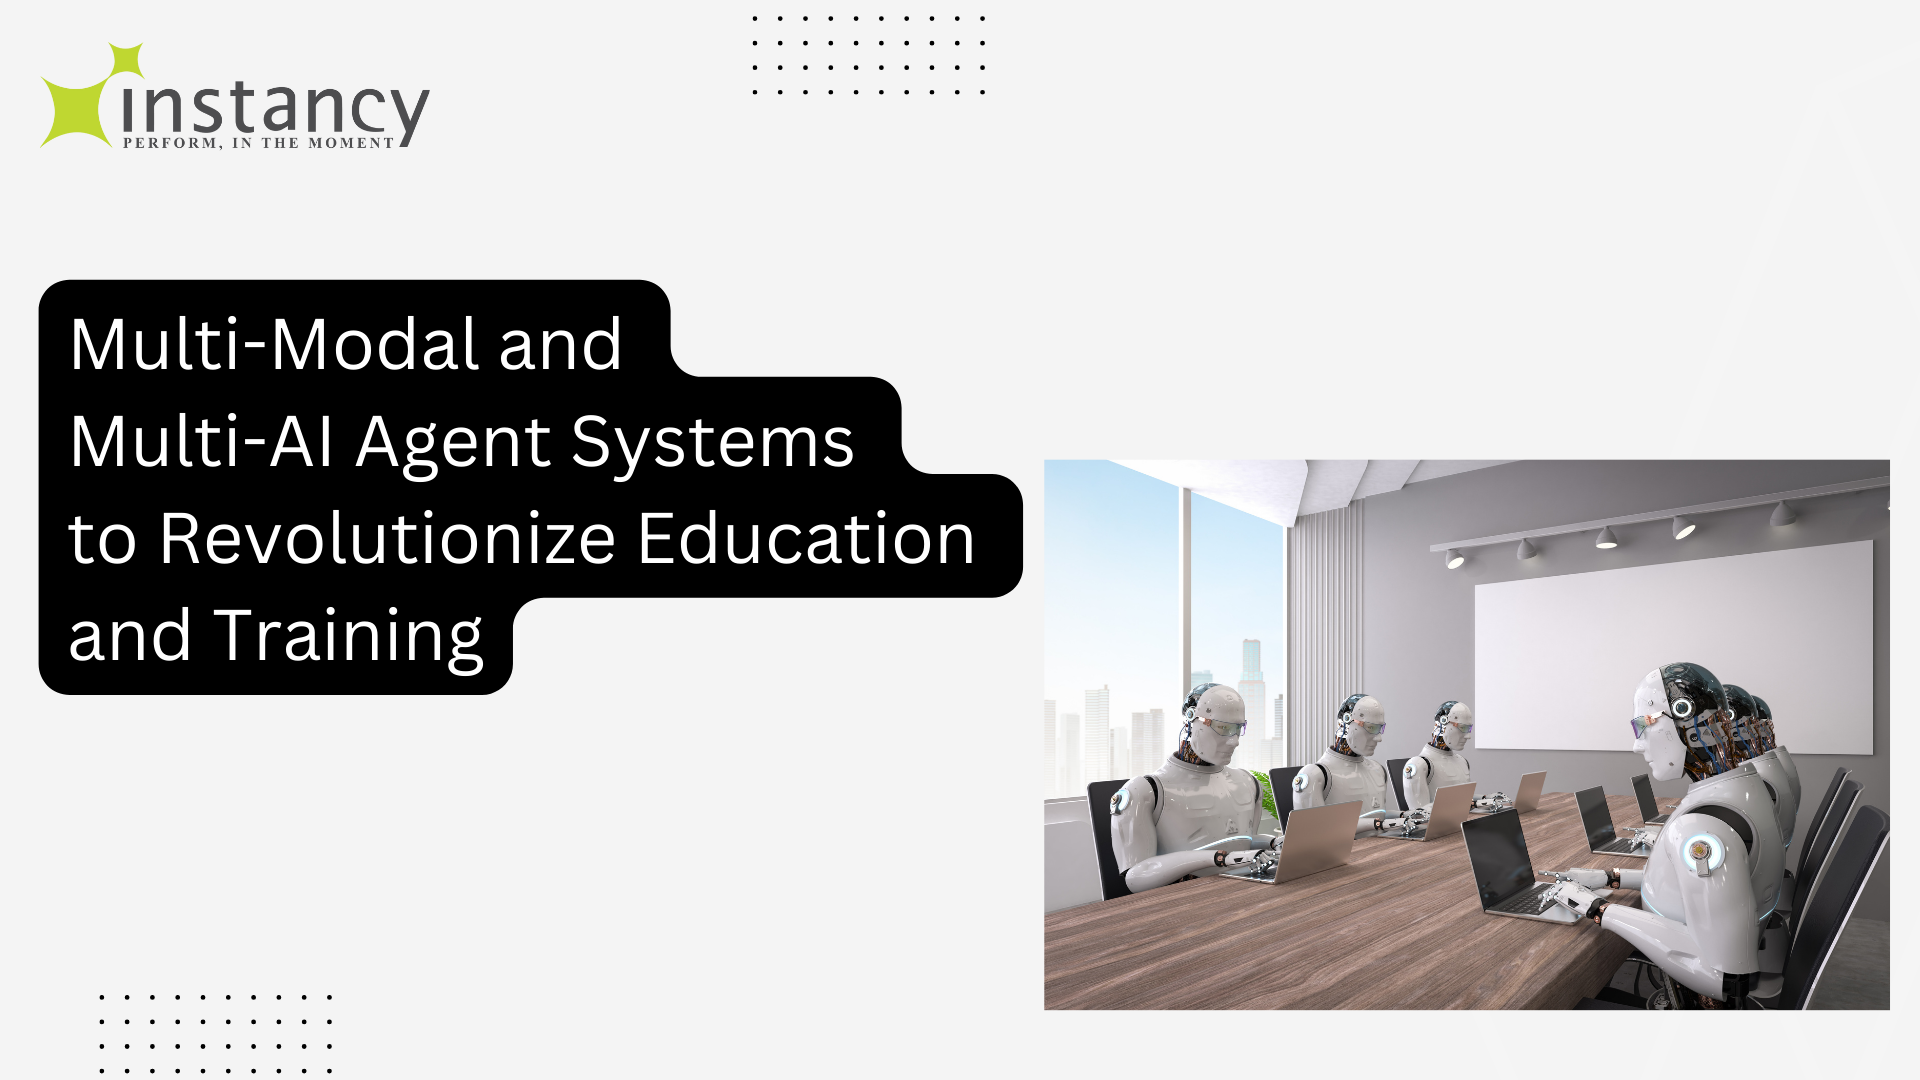 Multi-Modal and Multi-AI Agent Systems to Revolutionize Education and Training